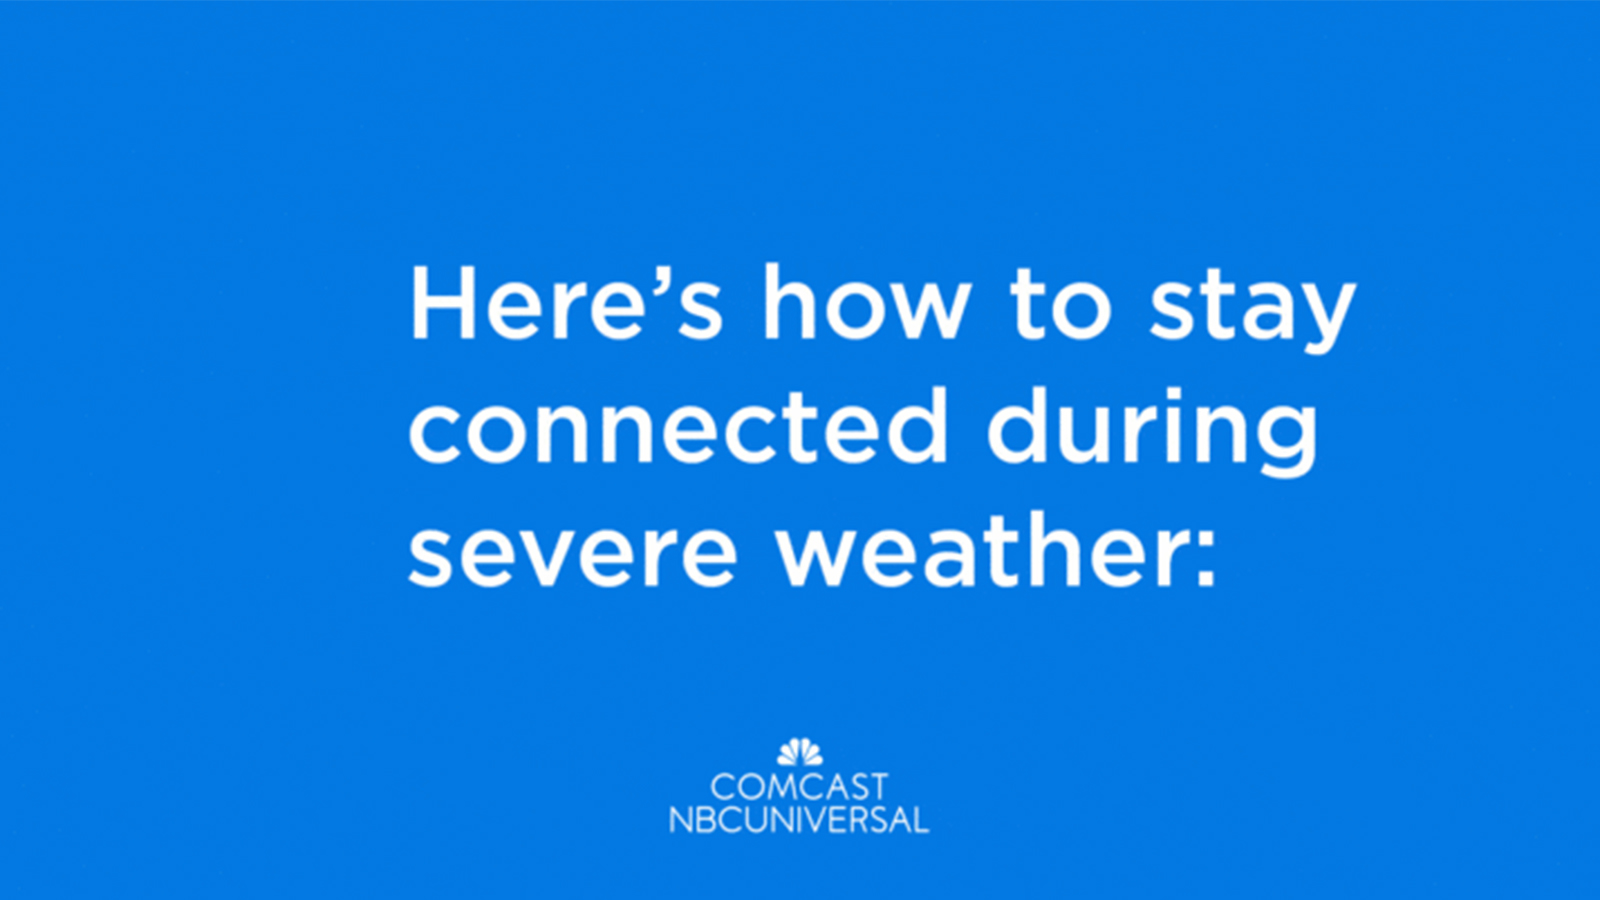 Severe weather warning with the Comcast NBCUniveral logo.